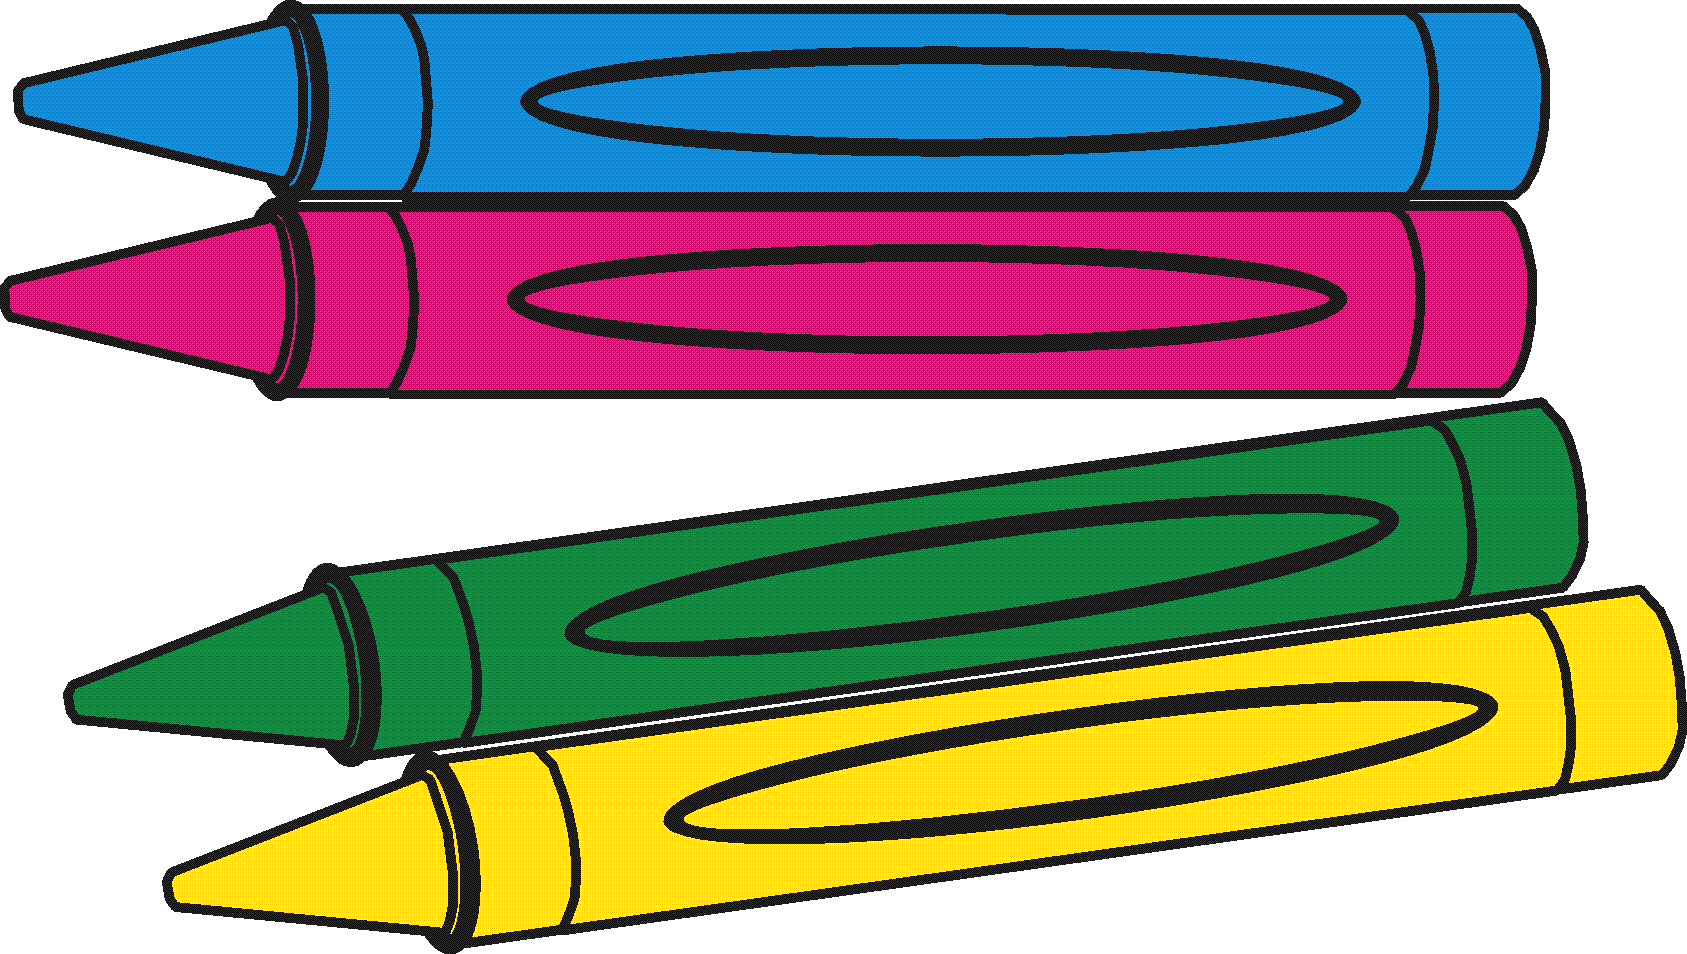 Crayons clipart black and white free clipart images 2